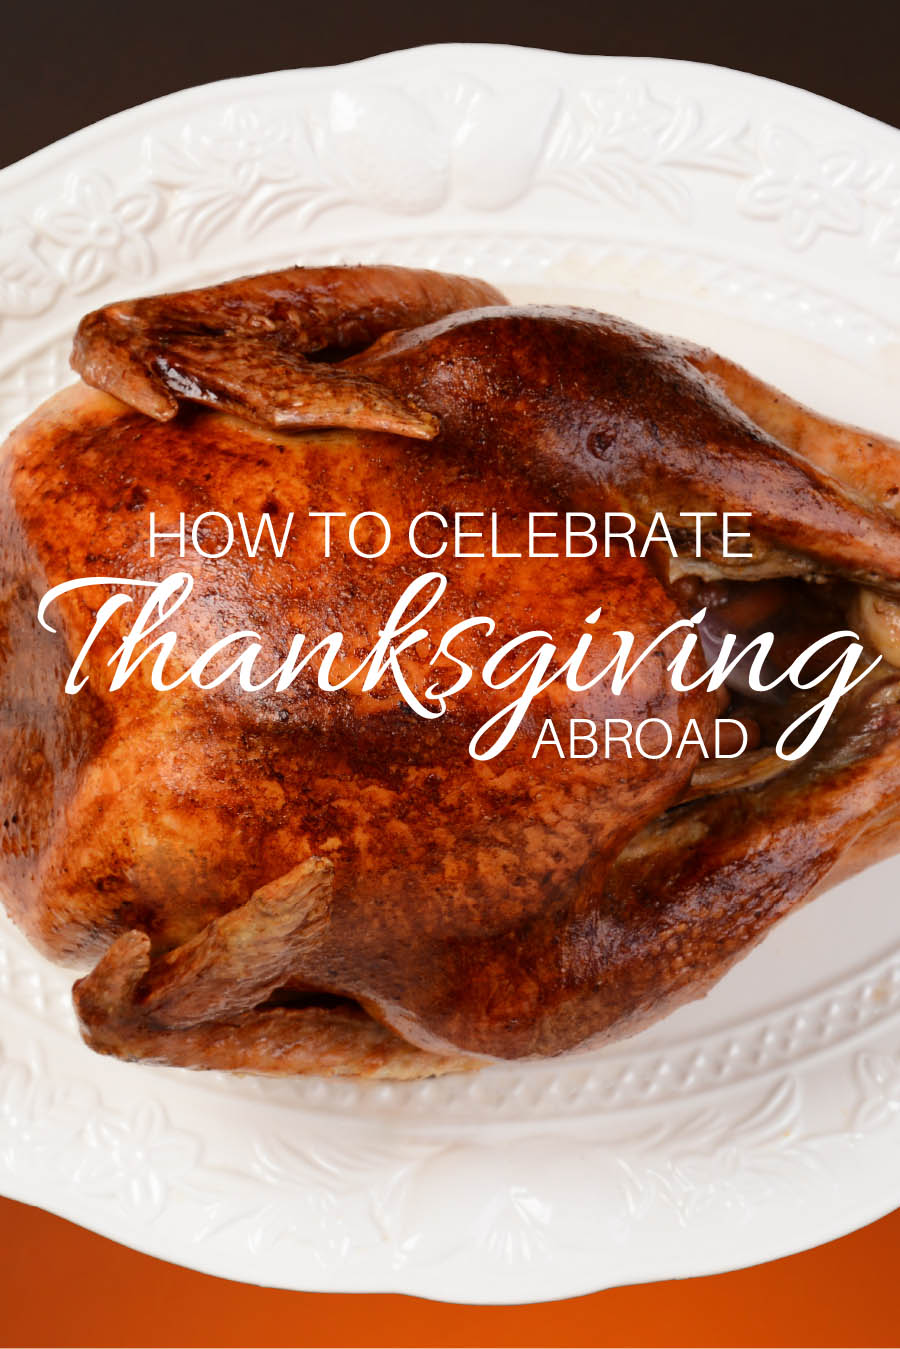 How to Celebrate Thanksgiving Abroad